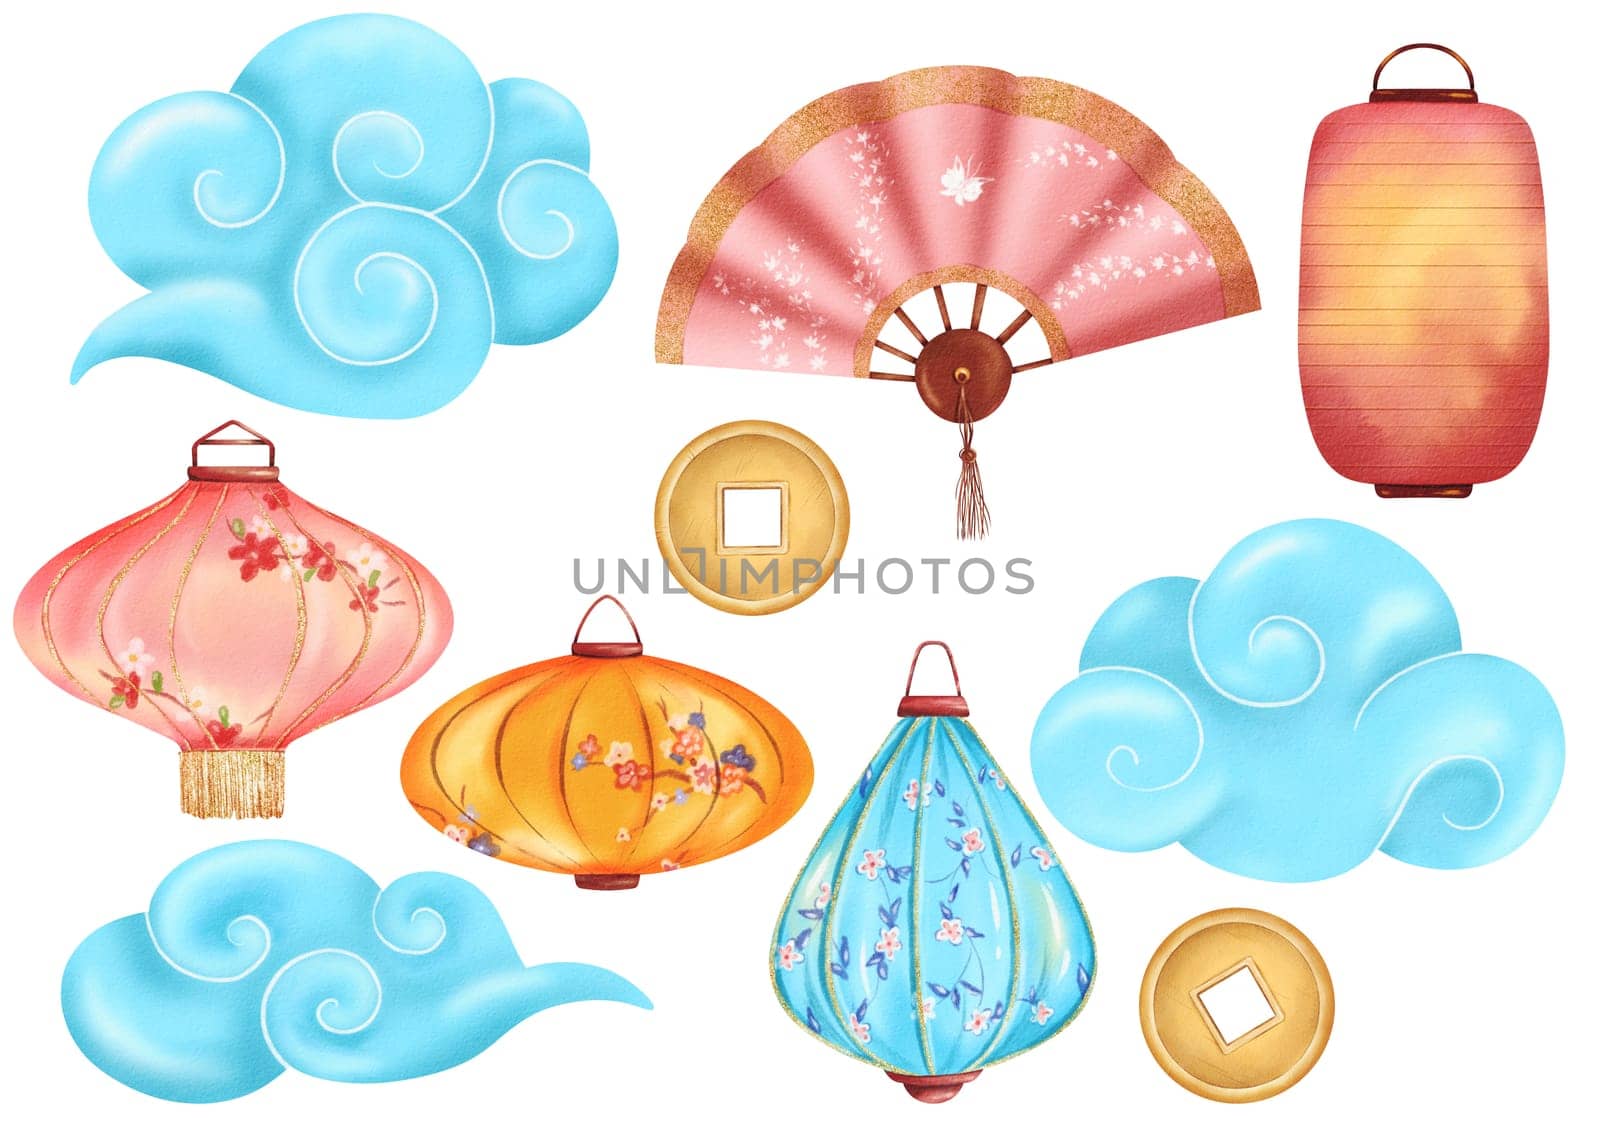 Set of watercolor isolated elements: cloud, fan, golden coins, and paper Chinese lanterns, all in a Chinese-style design. Perfect for Chinese New Year, Lantern Festival or depicting Eastern culture by Art_Mari_Ka